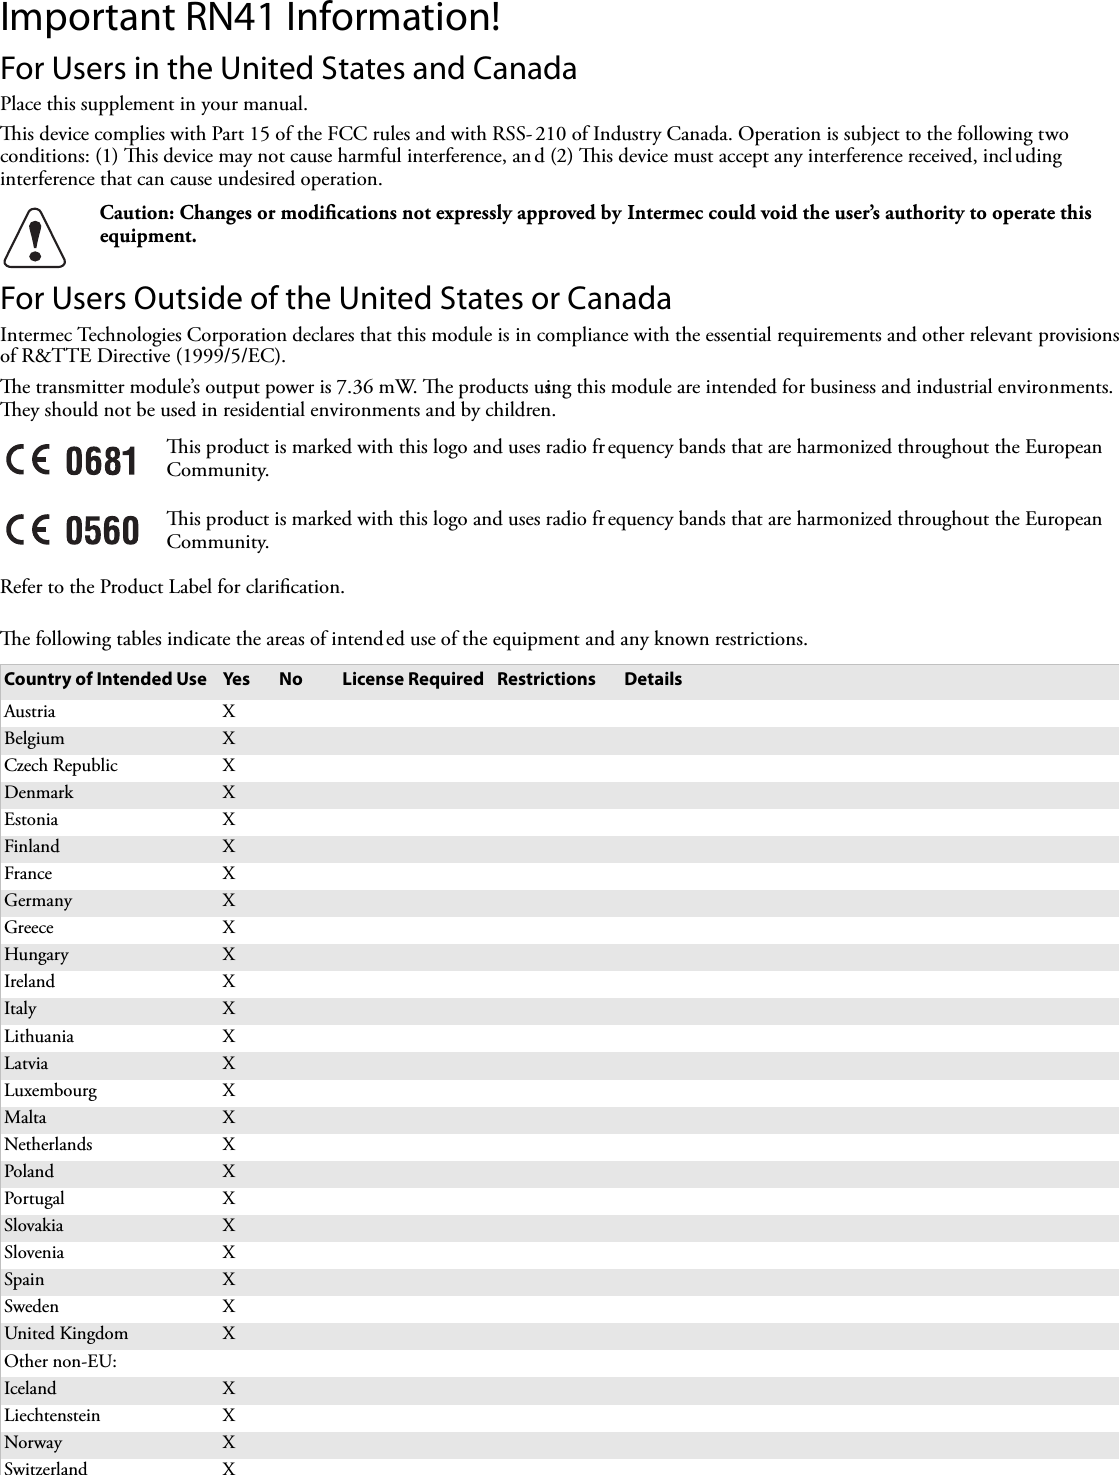 Important RN41 Information!For Users in the United States and CanadaPlace this supplement in your manual.is device complies with Part 15 of the FCC rules and with RSS- 210 of Industry Canada. Operation is subject to the following two conditions: (1) is device may not cause harmful interference, an d (2) is device must accept any interference received, including interference that can cause undesired operation.For Users Outside of the United States or CanadaIntermec Technologies Corporation declares that this module is in compliance with the essential requirements and other relevant provisions of R&amp;TTE Directive (1999/5/EC).e transmitter module’s output power is 7.36 mW. e products using this module are intended for business and industrial environments. ey should not be used in residential environments and by children.Refer to the Product Label for clariﬁcation.e following tables indicate the areas of intend ed use of the equipment and any known restrictions.Caution: Changes or modiﬁcations not expressly approved by Intermec could void the user’s authority to operate this equipment.is product is marked with this logo and uses radio frequency bands that are harmonized throughout the European Community.is product is marked with this logo and uses radio frequency bands that are harmonized throughout the European Community.Country of Intended Use Yes No License Required Restrictions DetailsAustria XBelgium XCzech Republic XDenmark XEstonia XFinland XFrance XGermany XGreece XHungary XIreland XItaly XLithuania XLatvia XLuxembourg XMalta XNetherlands XPoland XPortugal XSlovakia XSlovenia XSpain XSweden XUnited Kingdom XOther non-EU:Iceland XLiechtenstein XNorway XSwitzerland X